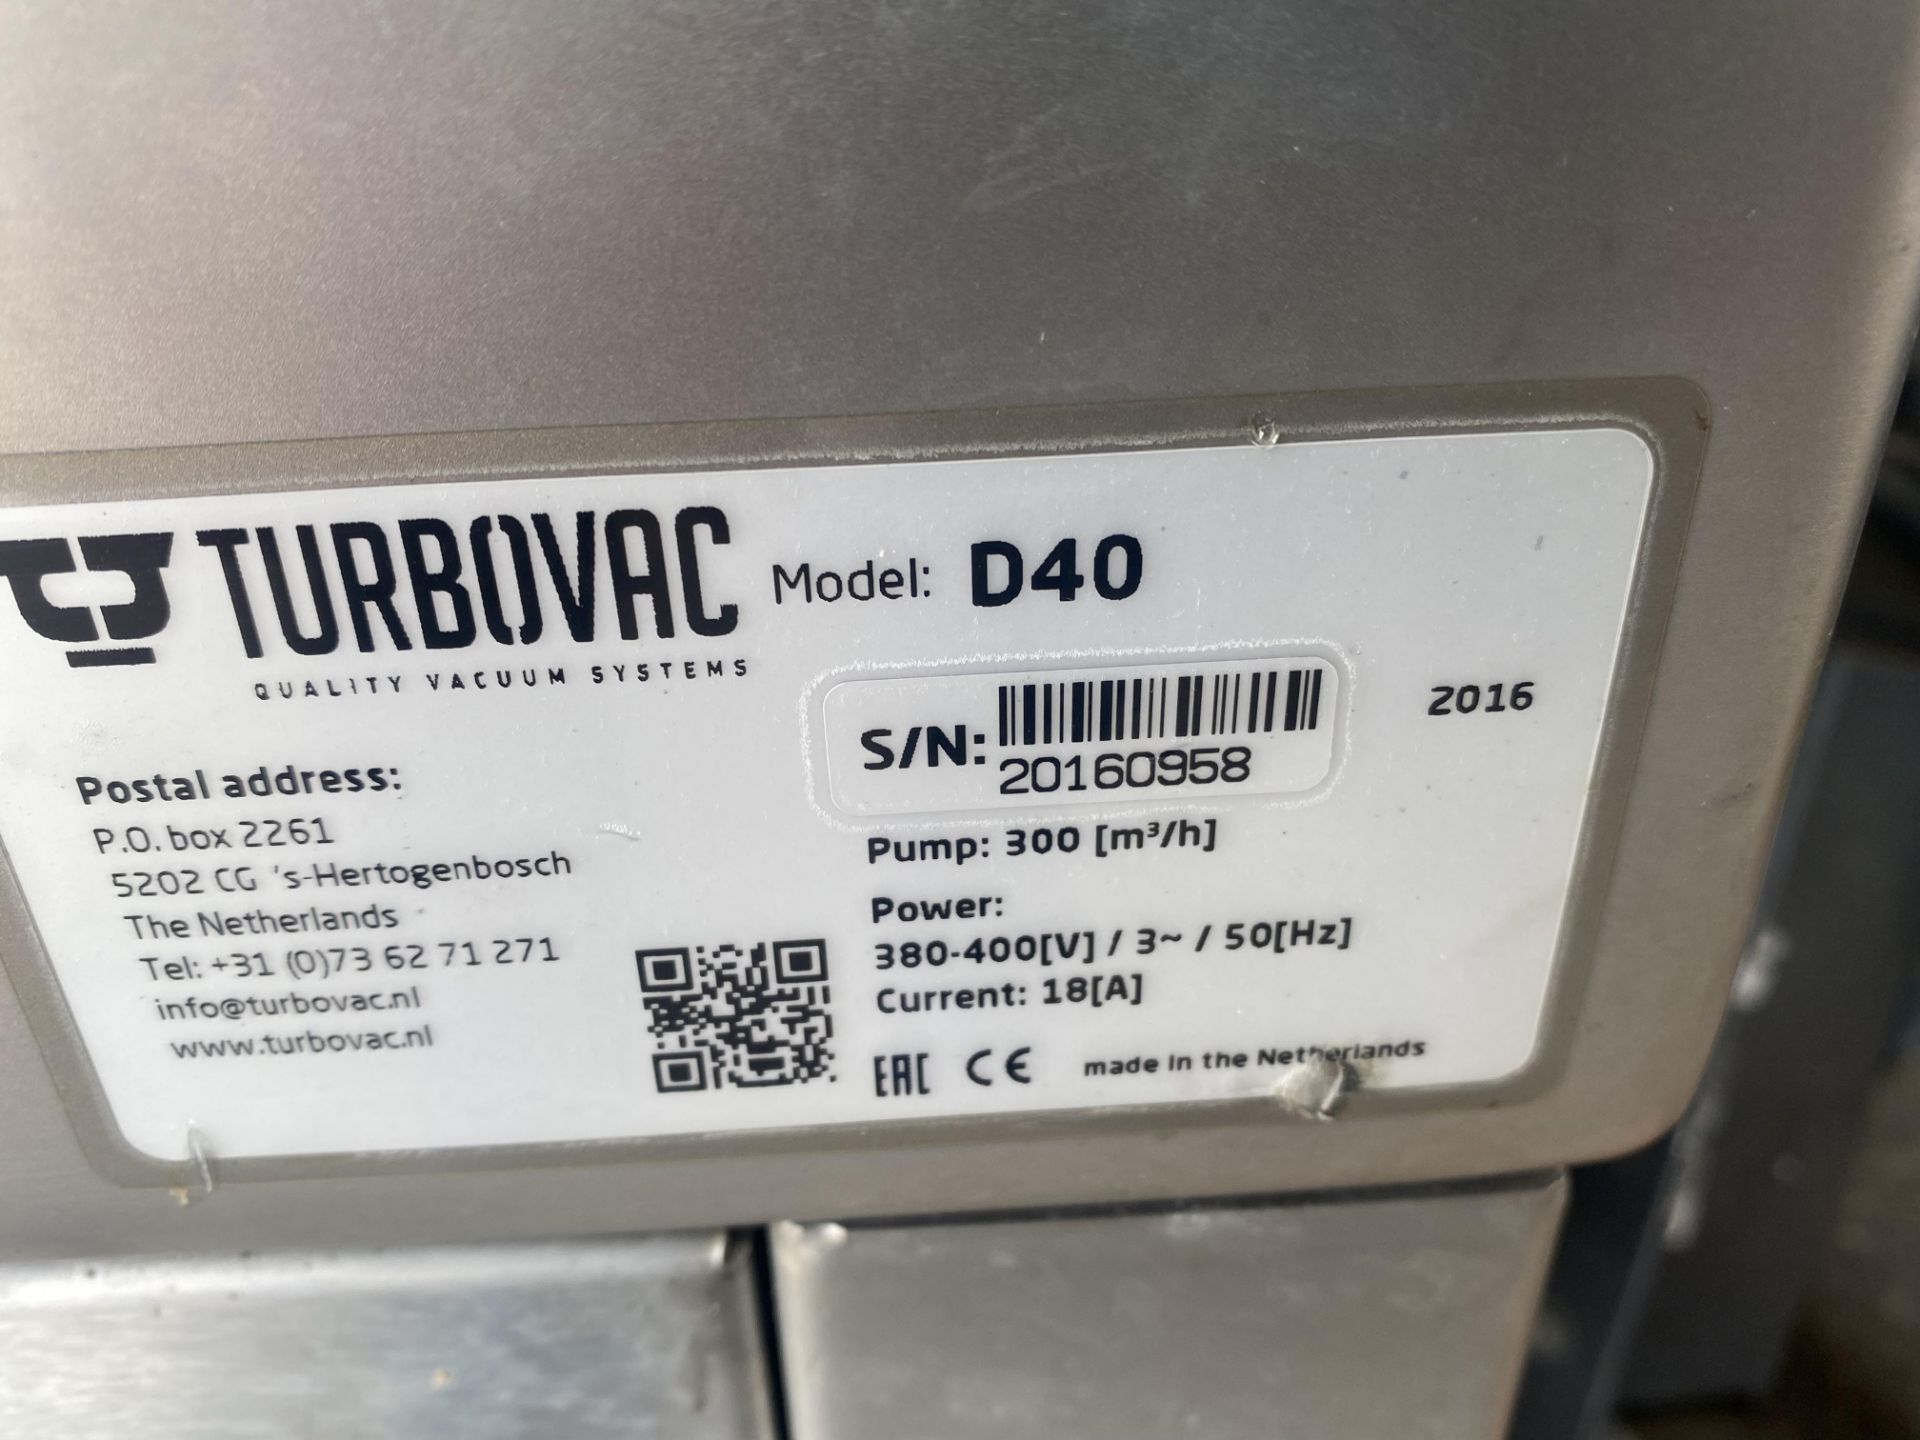 Turbovac vacuum packing machine , Model D40 , sn 20160958 , DOM 2016 (located in roller shutters) - Image 4 of 4